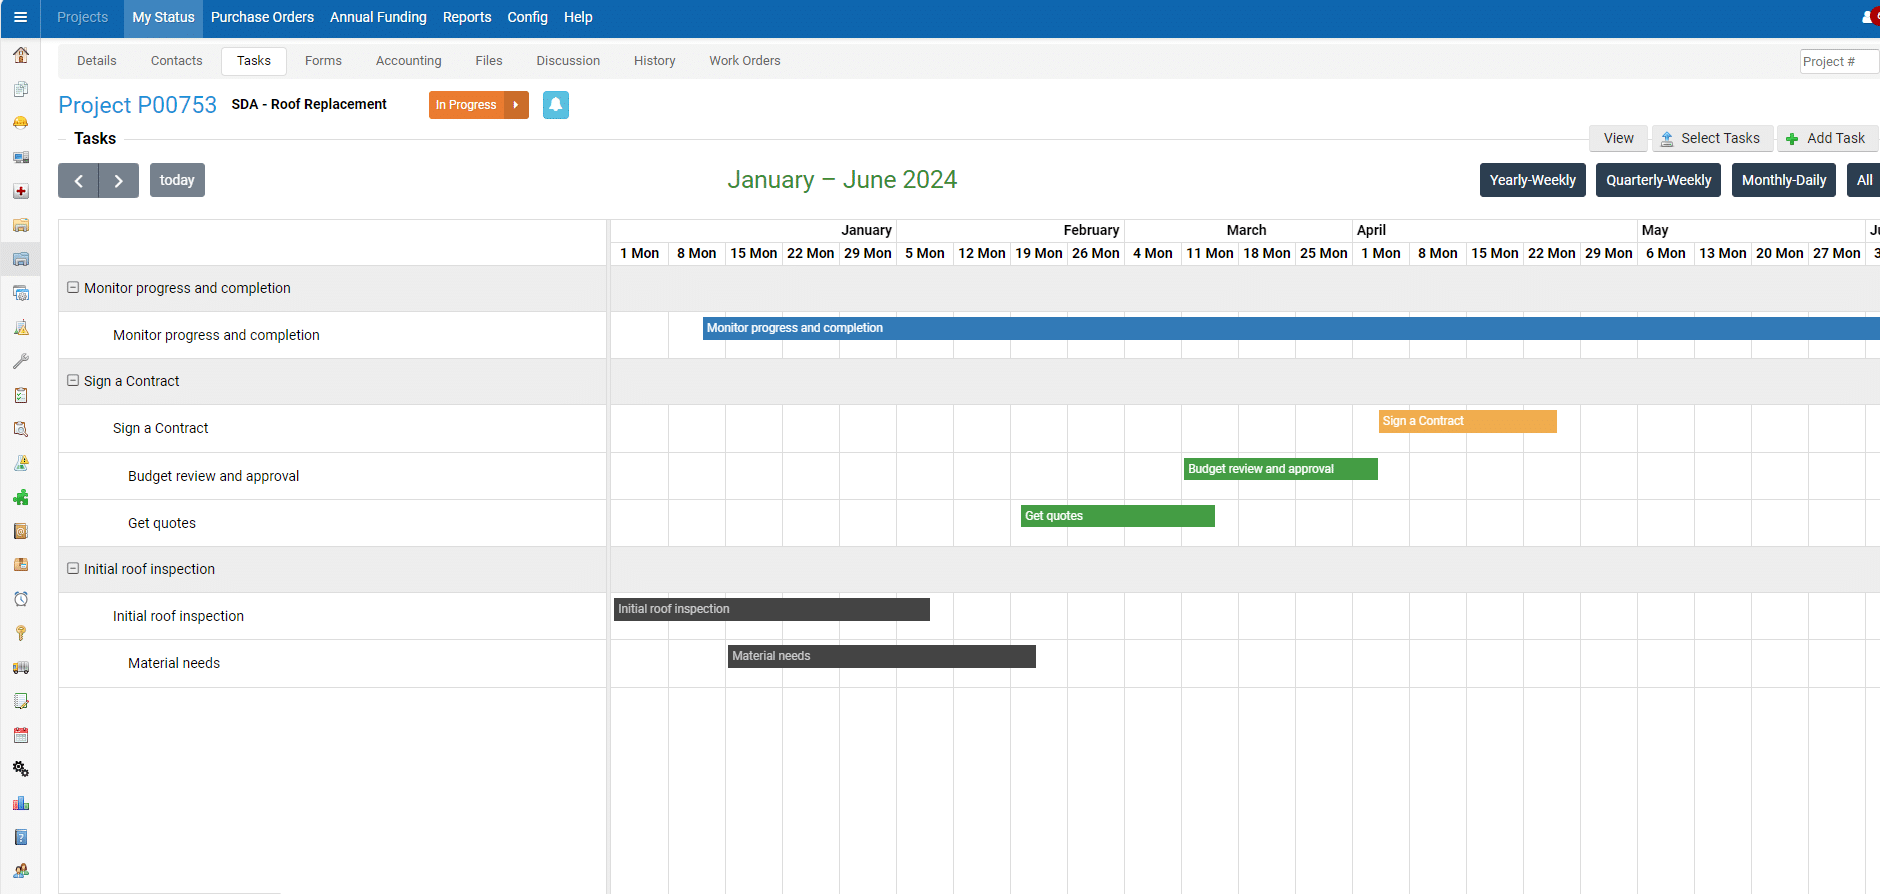 A screenshot of the Project Manager Module tracking spreadsheet with various tasks listed, each accompanied by a progress bar, dates, and status updates in a gantt chart format, spanning January to June 2014